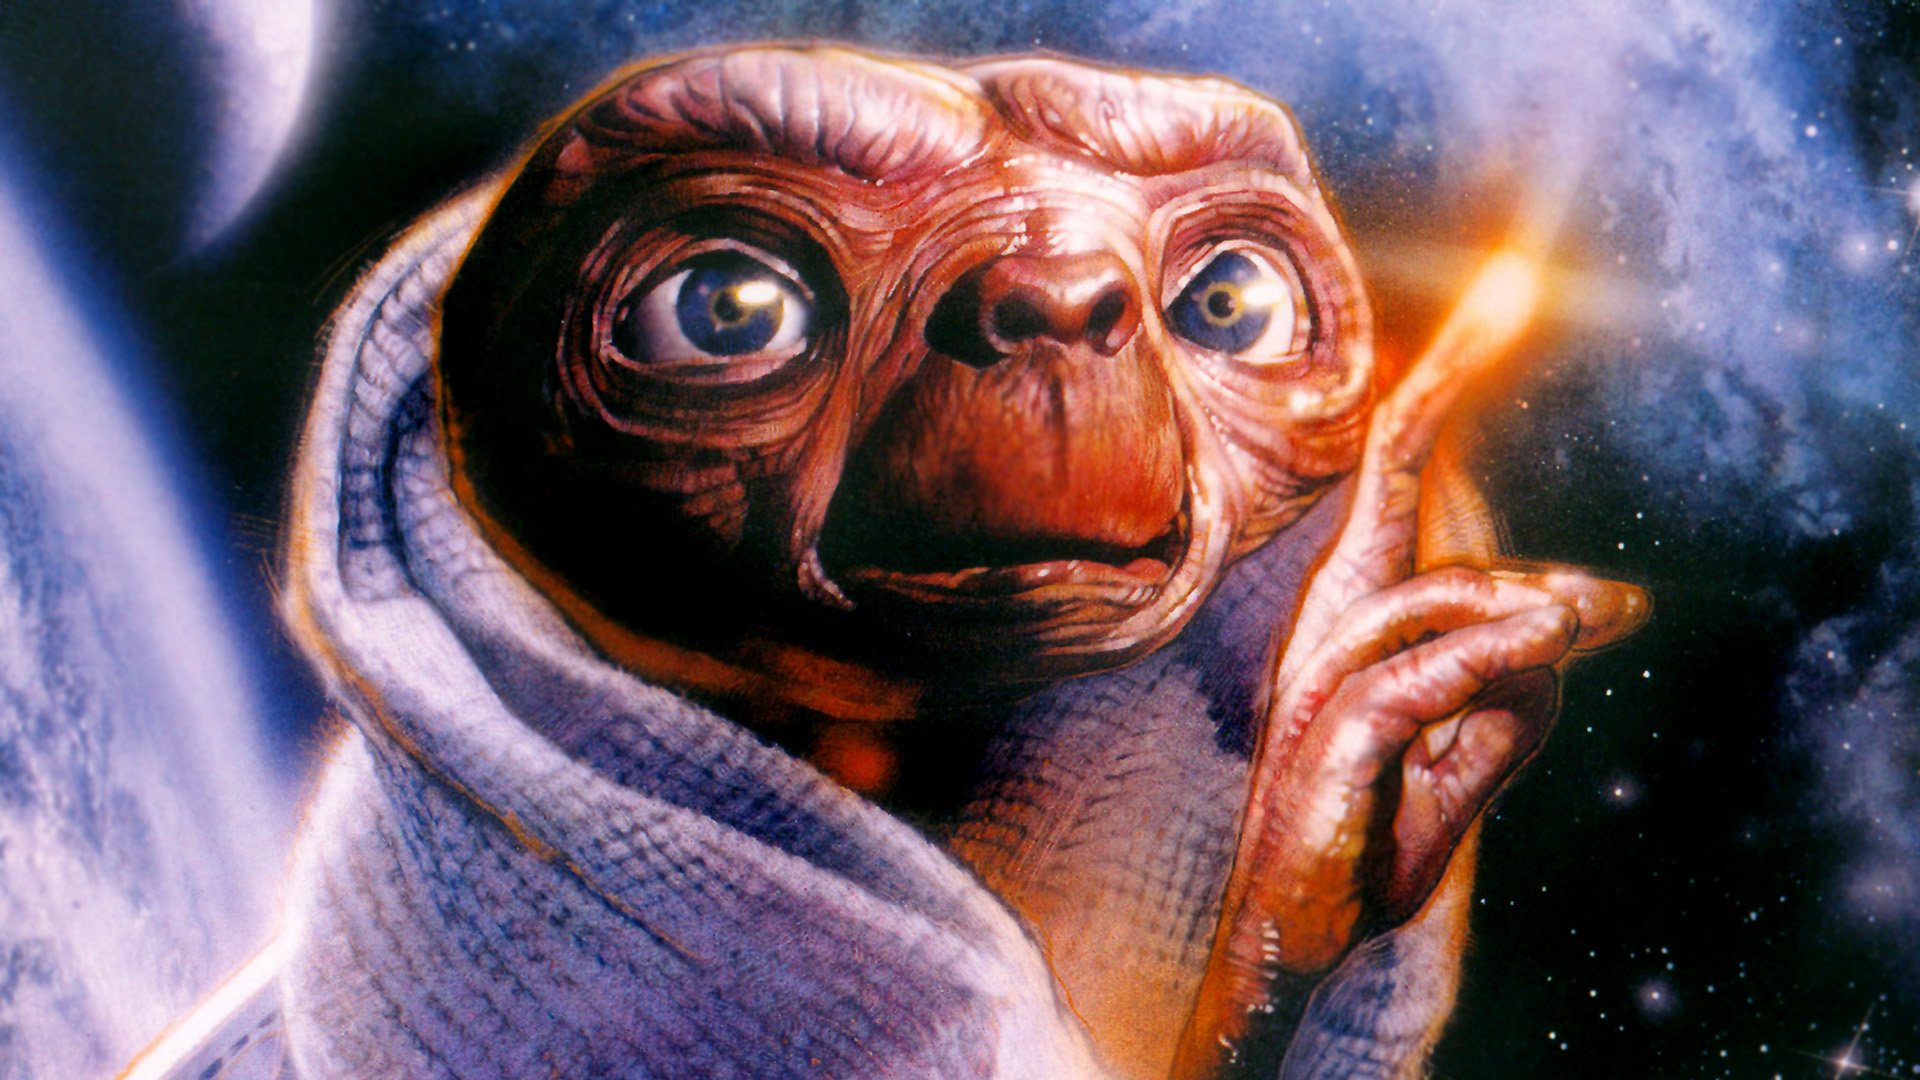 E.T. the Extra-Terrestrial download the new version for ios